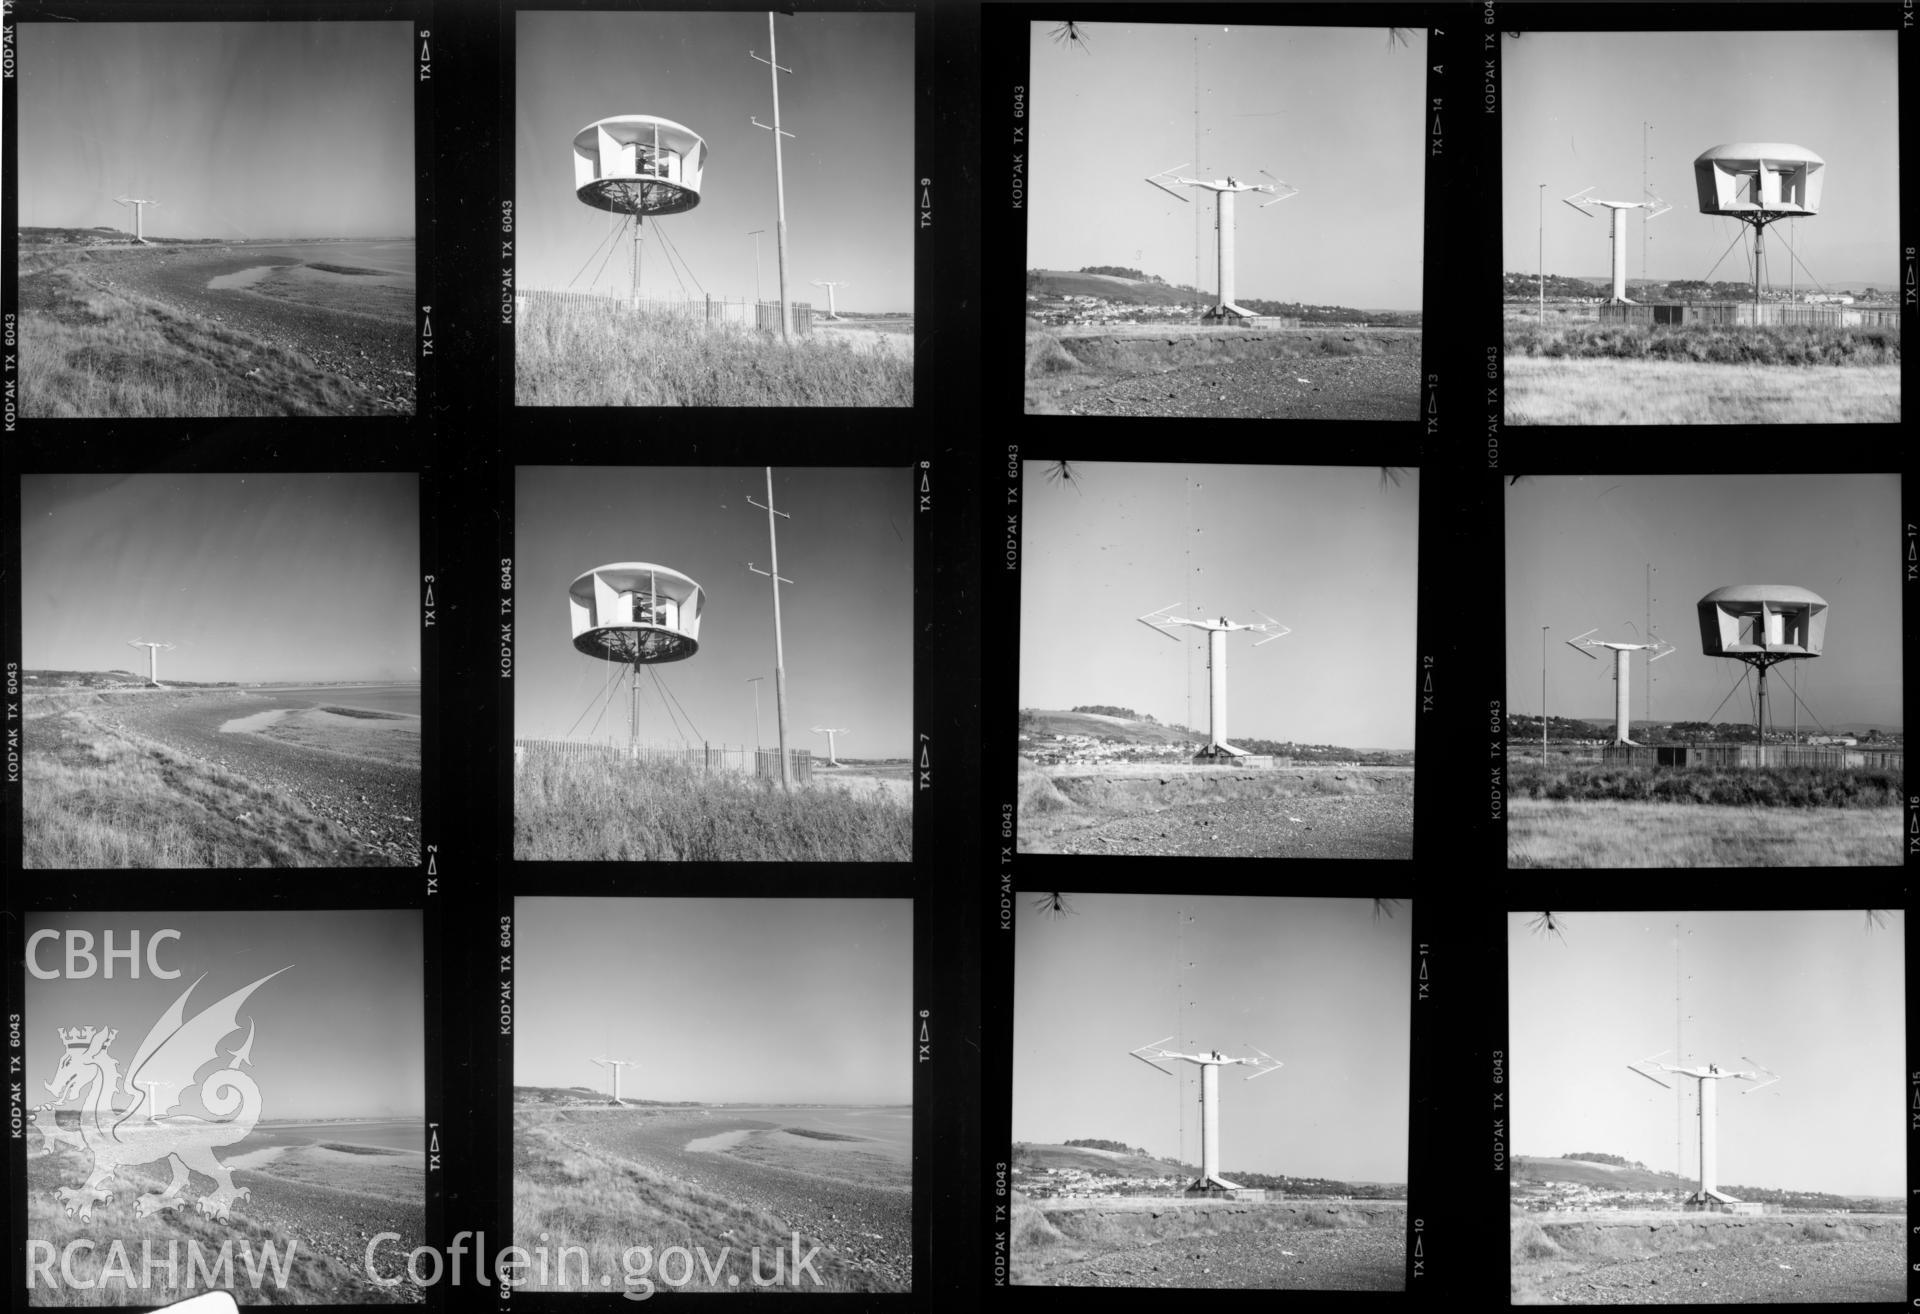 Contact sheet 3b of views of the prototype wind turbine at Carmarthen Bay in 1986. From the Central Office of Information Collection.